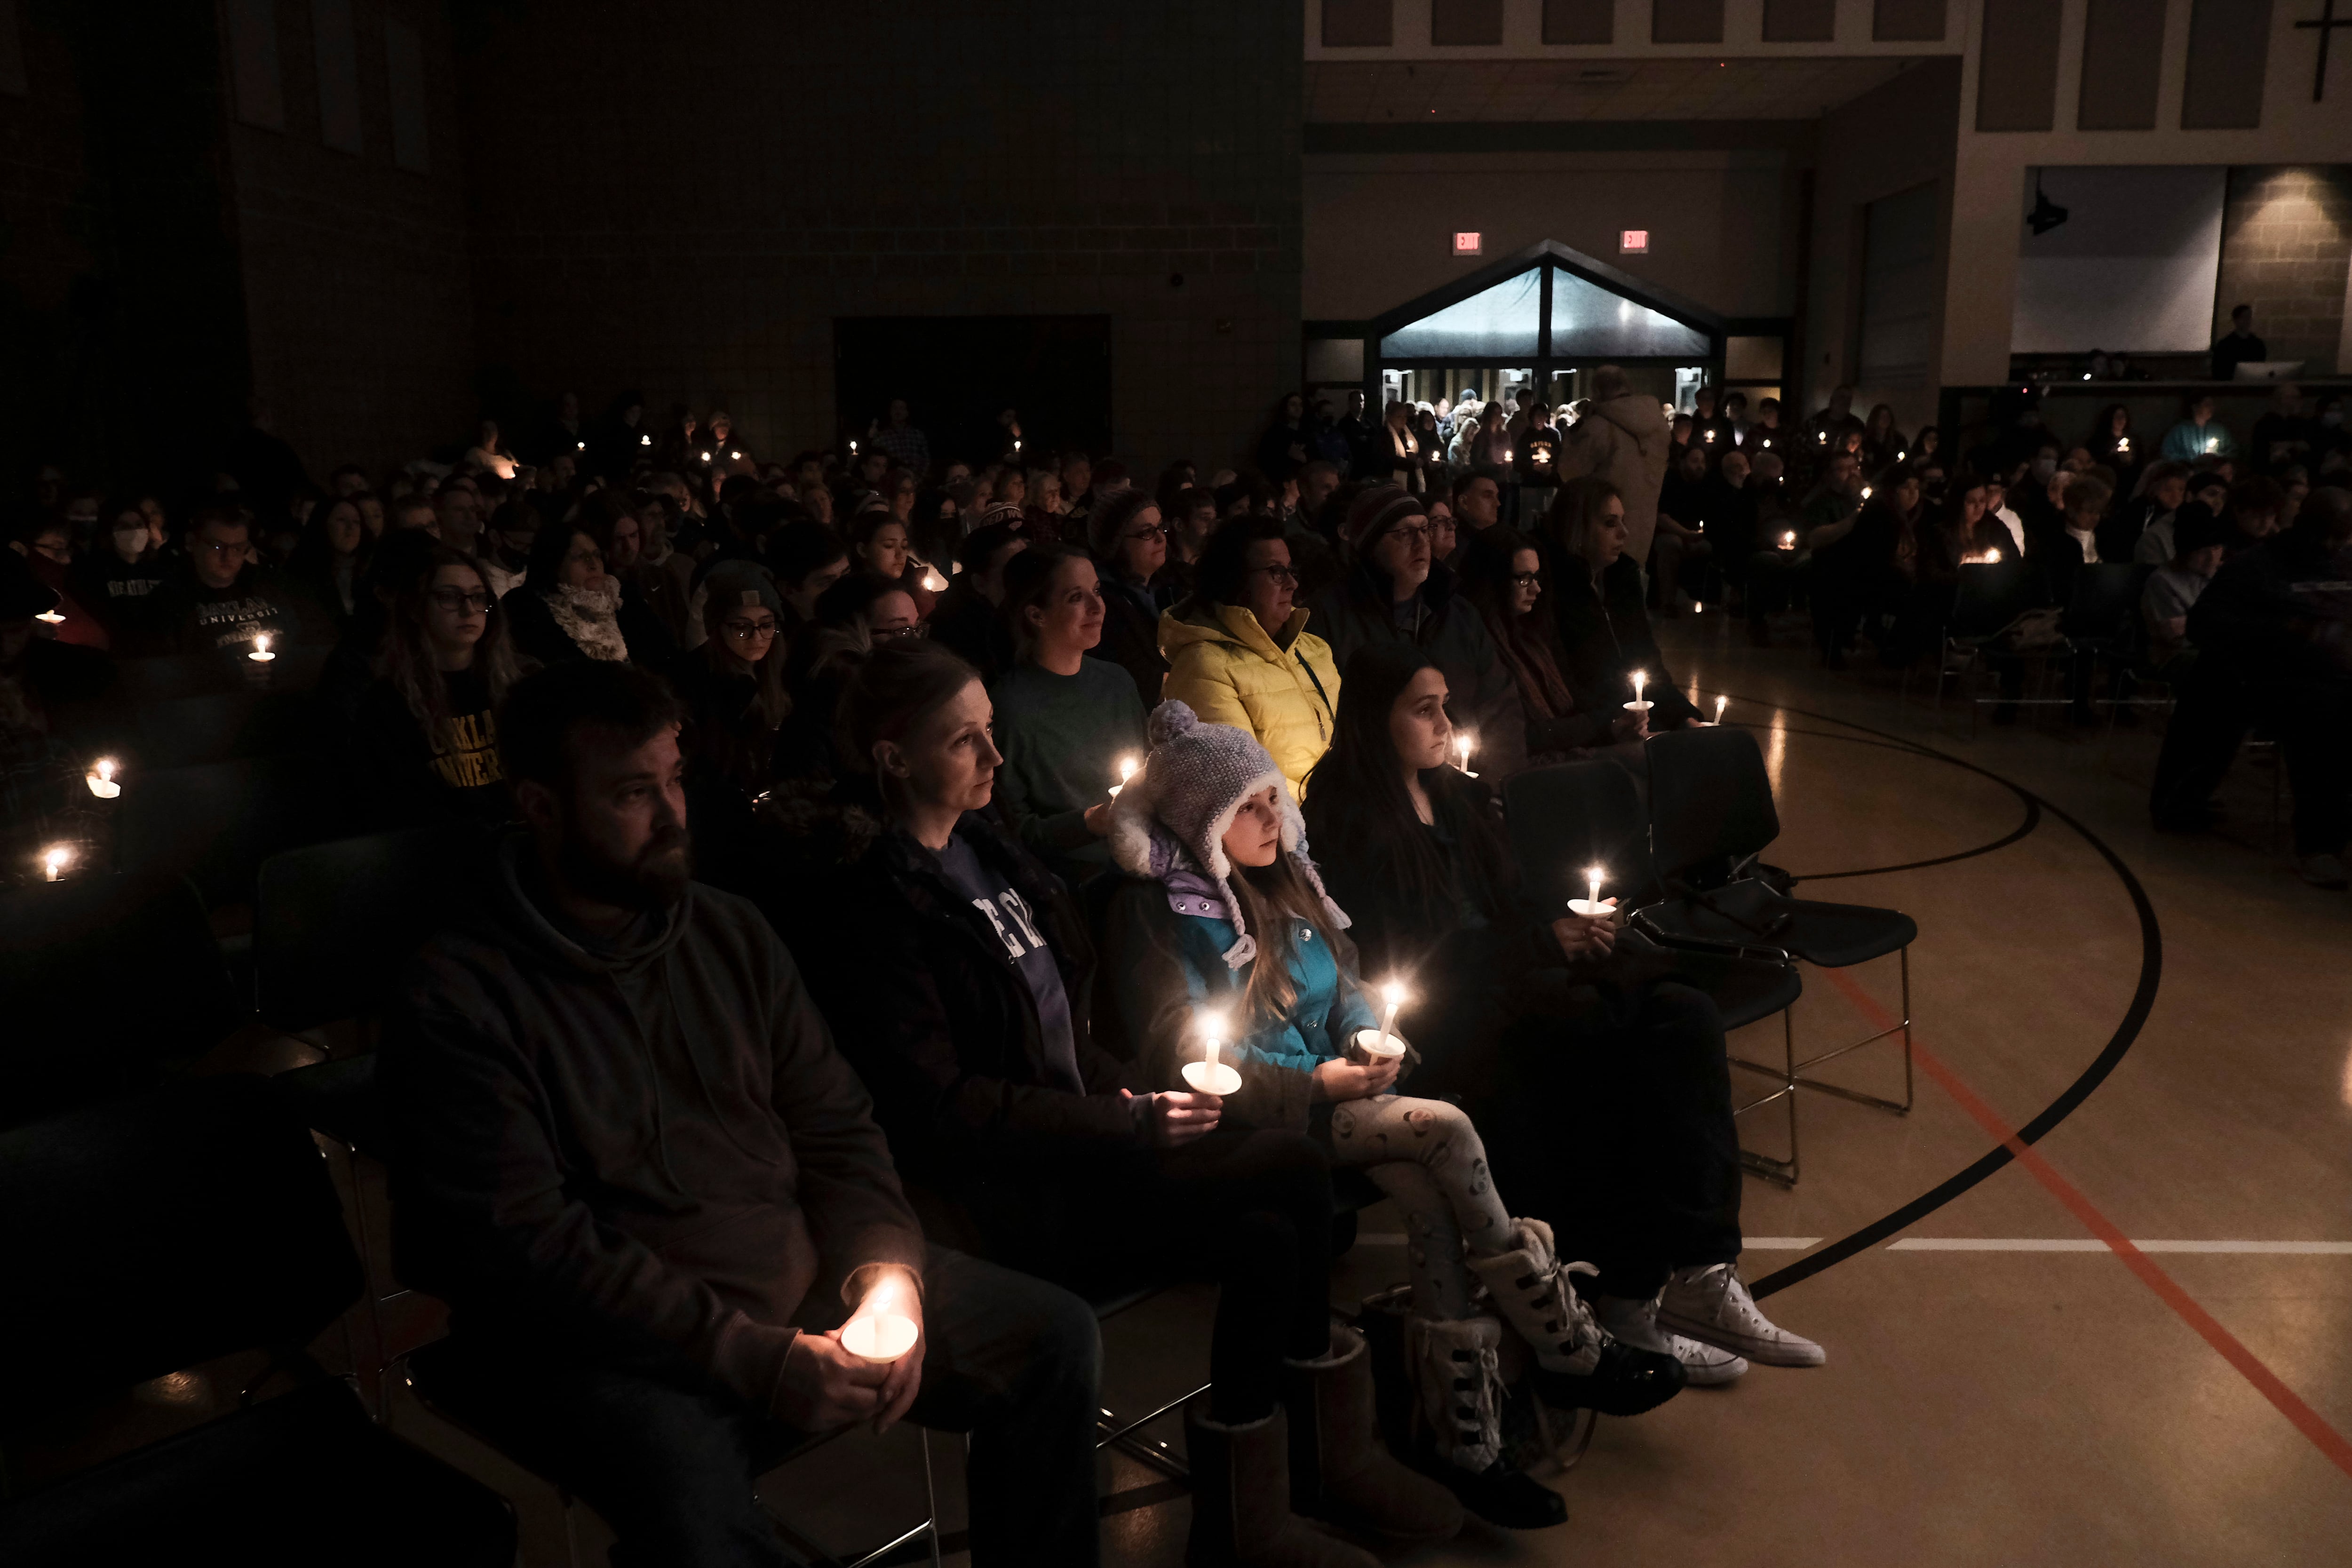 Scores of students, teachers, parents, and community members hold a candlelight vigil following a school shooting.